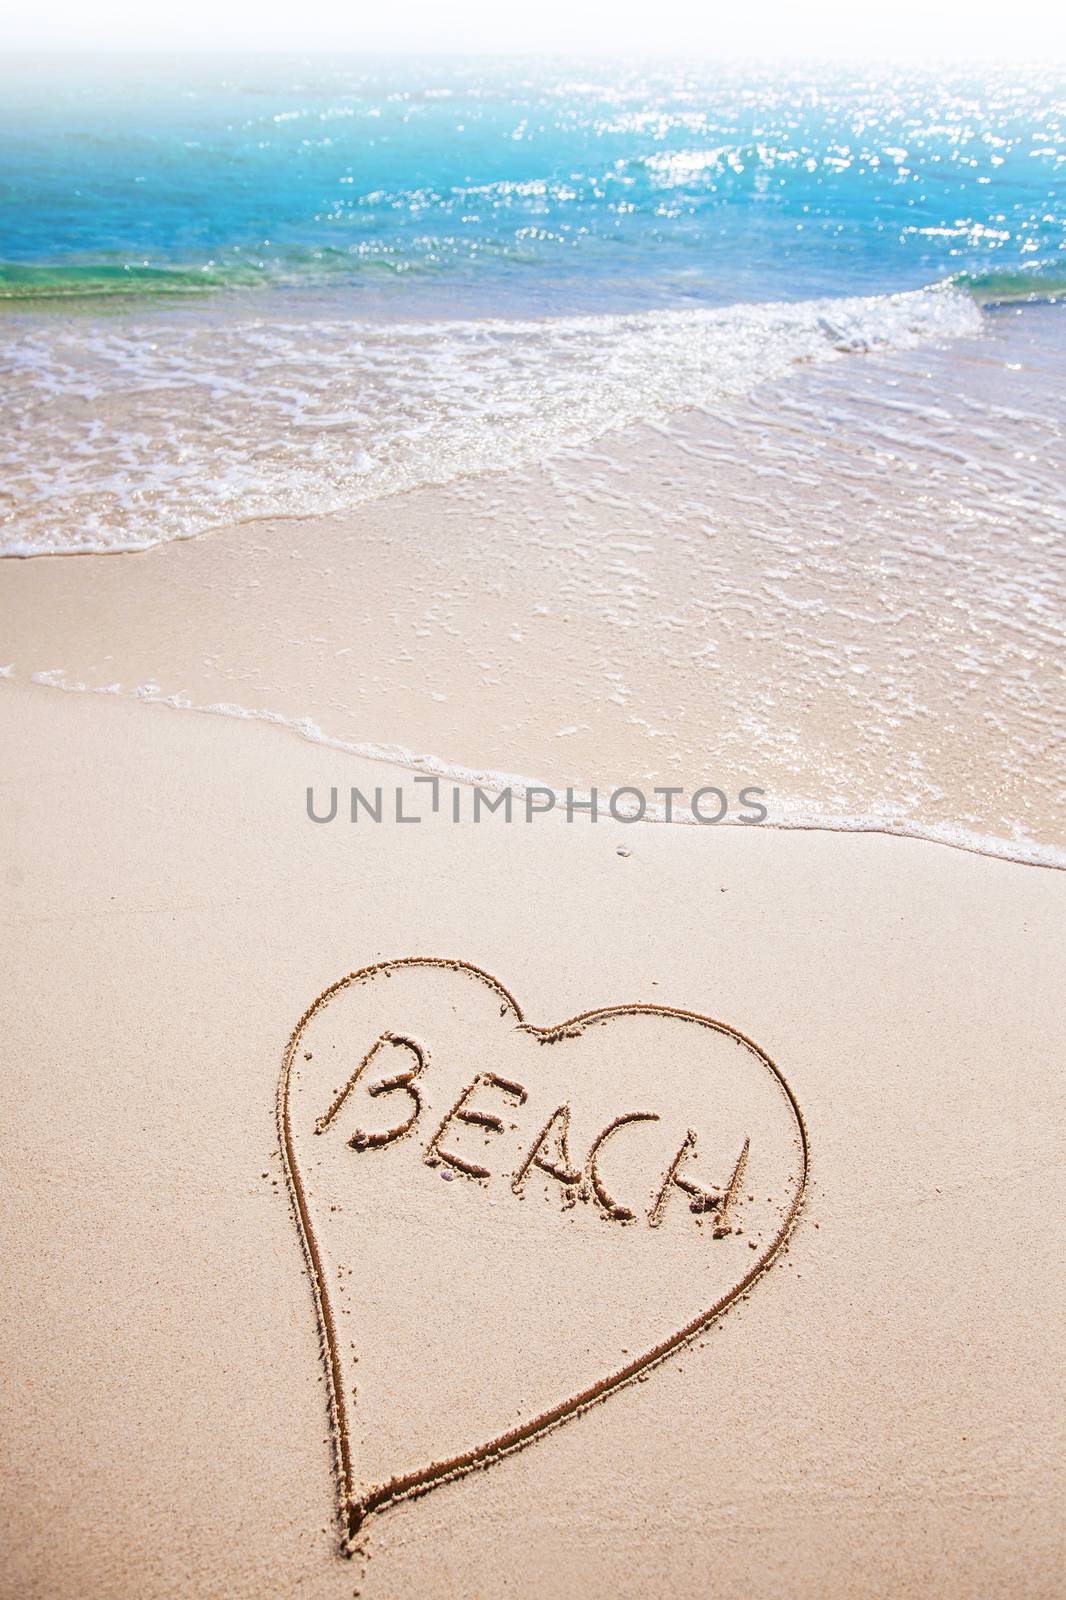 Heart drawing and word BEACH written on the sand of a beach